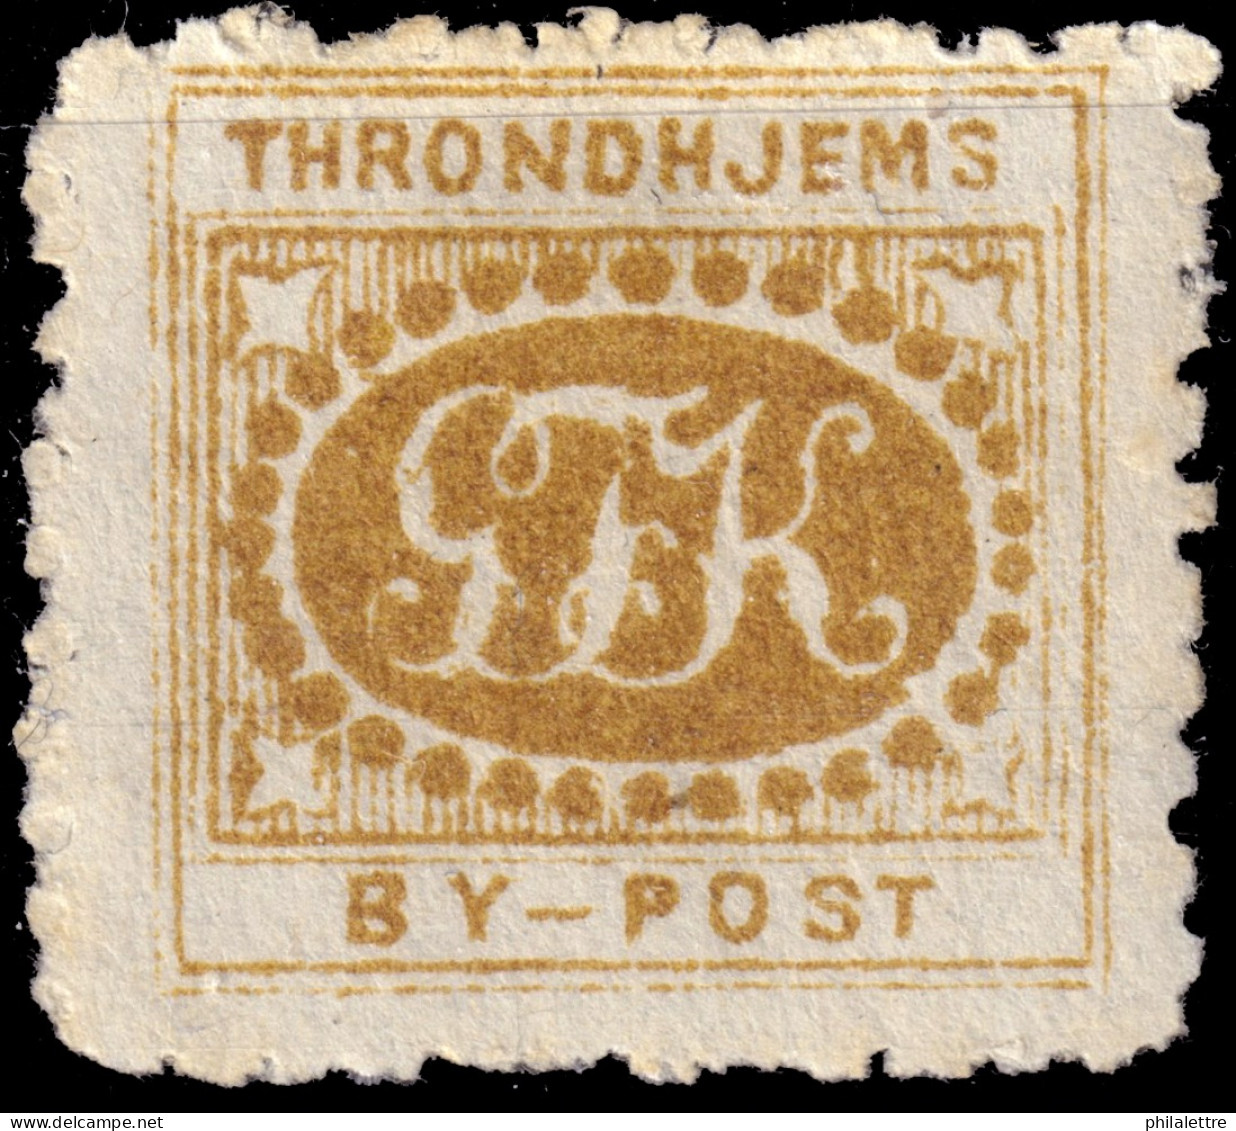 NORVÈGE / NORWAY - Braekstad Local Post TRONDHJEM (Trondheim) 1sk Ochre No O/P, Perf. (type 4 Reprint, 1872) - Mint* - Local Post Stamps